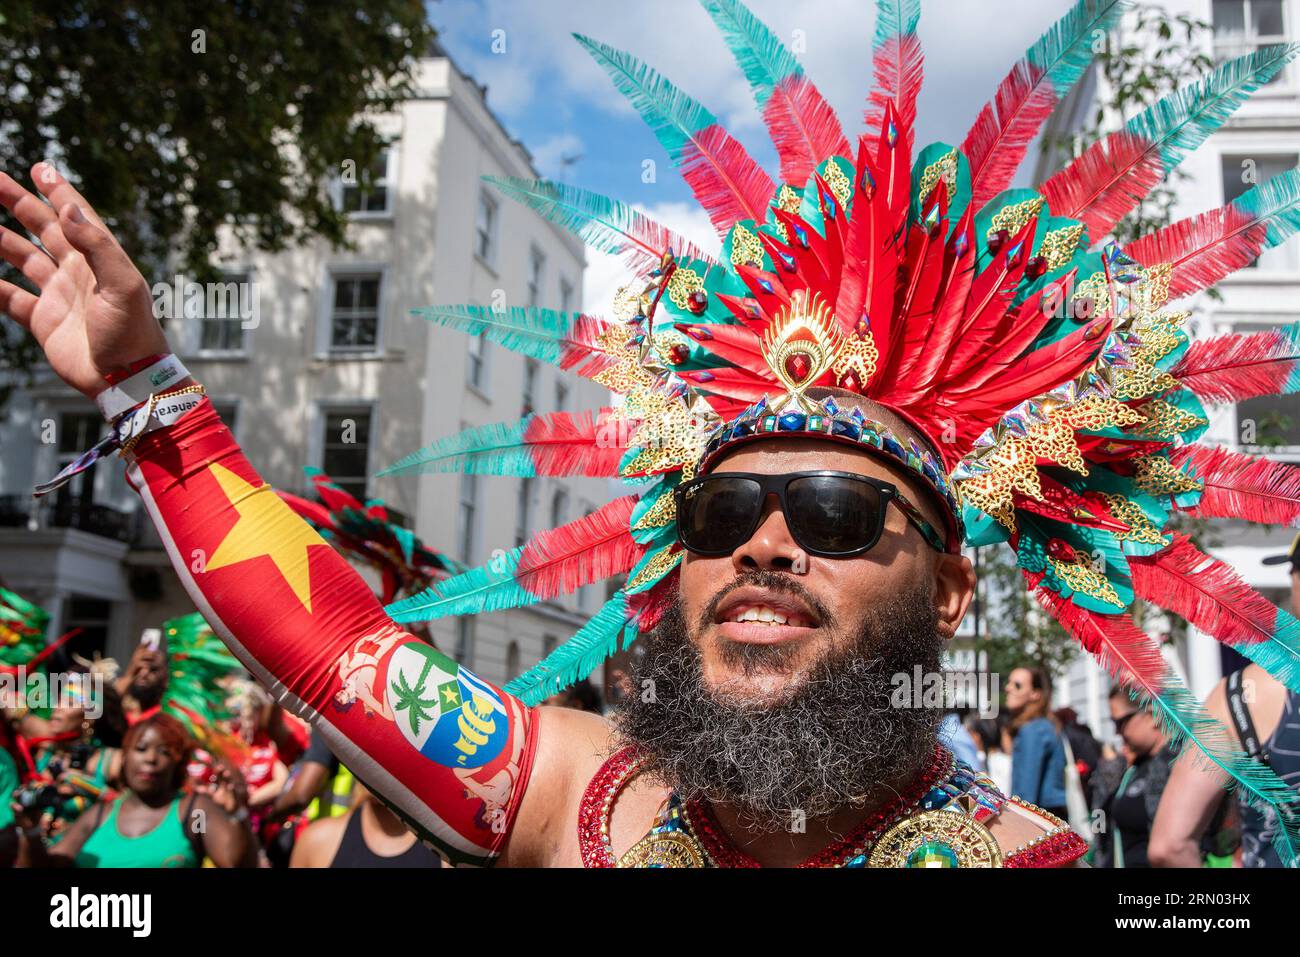 London, UK. 28th Aug, 2023. A dancer seen dressed in a colorful costume during the Notting Hill Carnival in London. The Notting Hill Carnival is one of the biggest street festivals in the world. It started in 1966 but originated with the Caribbean Carnival organised in 1959 with the immigrant community from Trinidad and Tobago. This year the Notting Hill Carnival marks the 50th anniversary of the introduction of the sound systems and Mas bands. Also it marks the 75th anniversary of the arrival of the passengers of the Empire Windrush to the UK. (Credit Image: © Krisztian Elek/SOPA Stock Photo